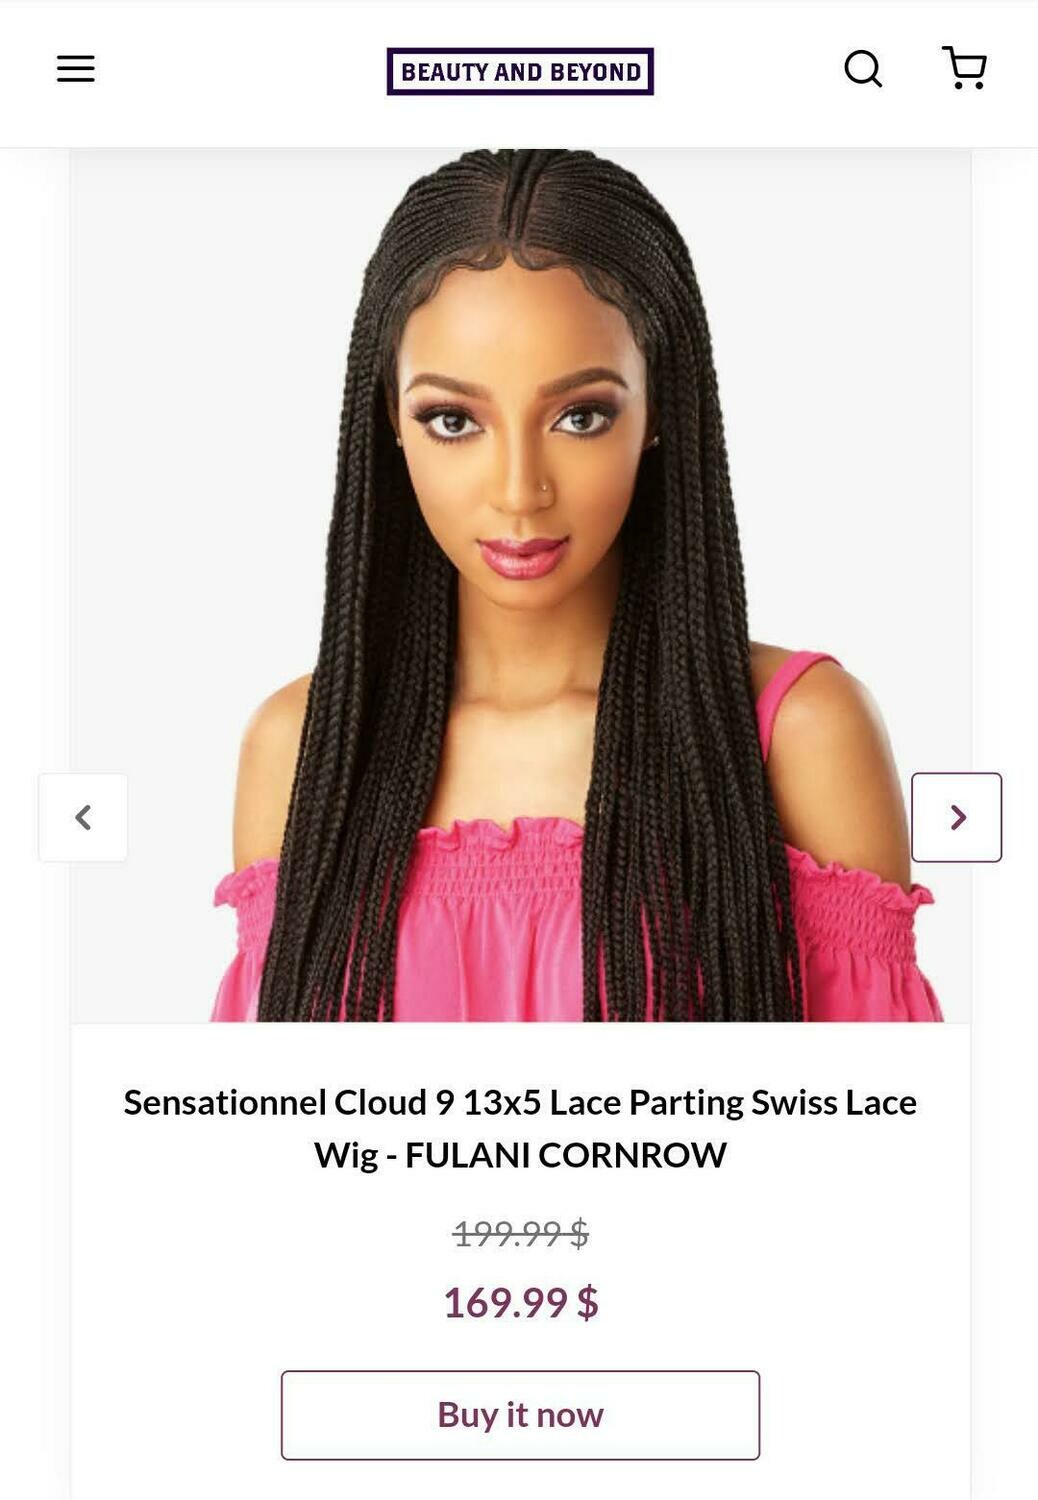 Sensationnel Cloud 9 13x7 Lace Parting Swiss Lace Wig-FEED IN FULANI CONROW